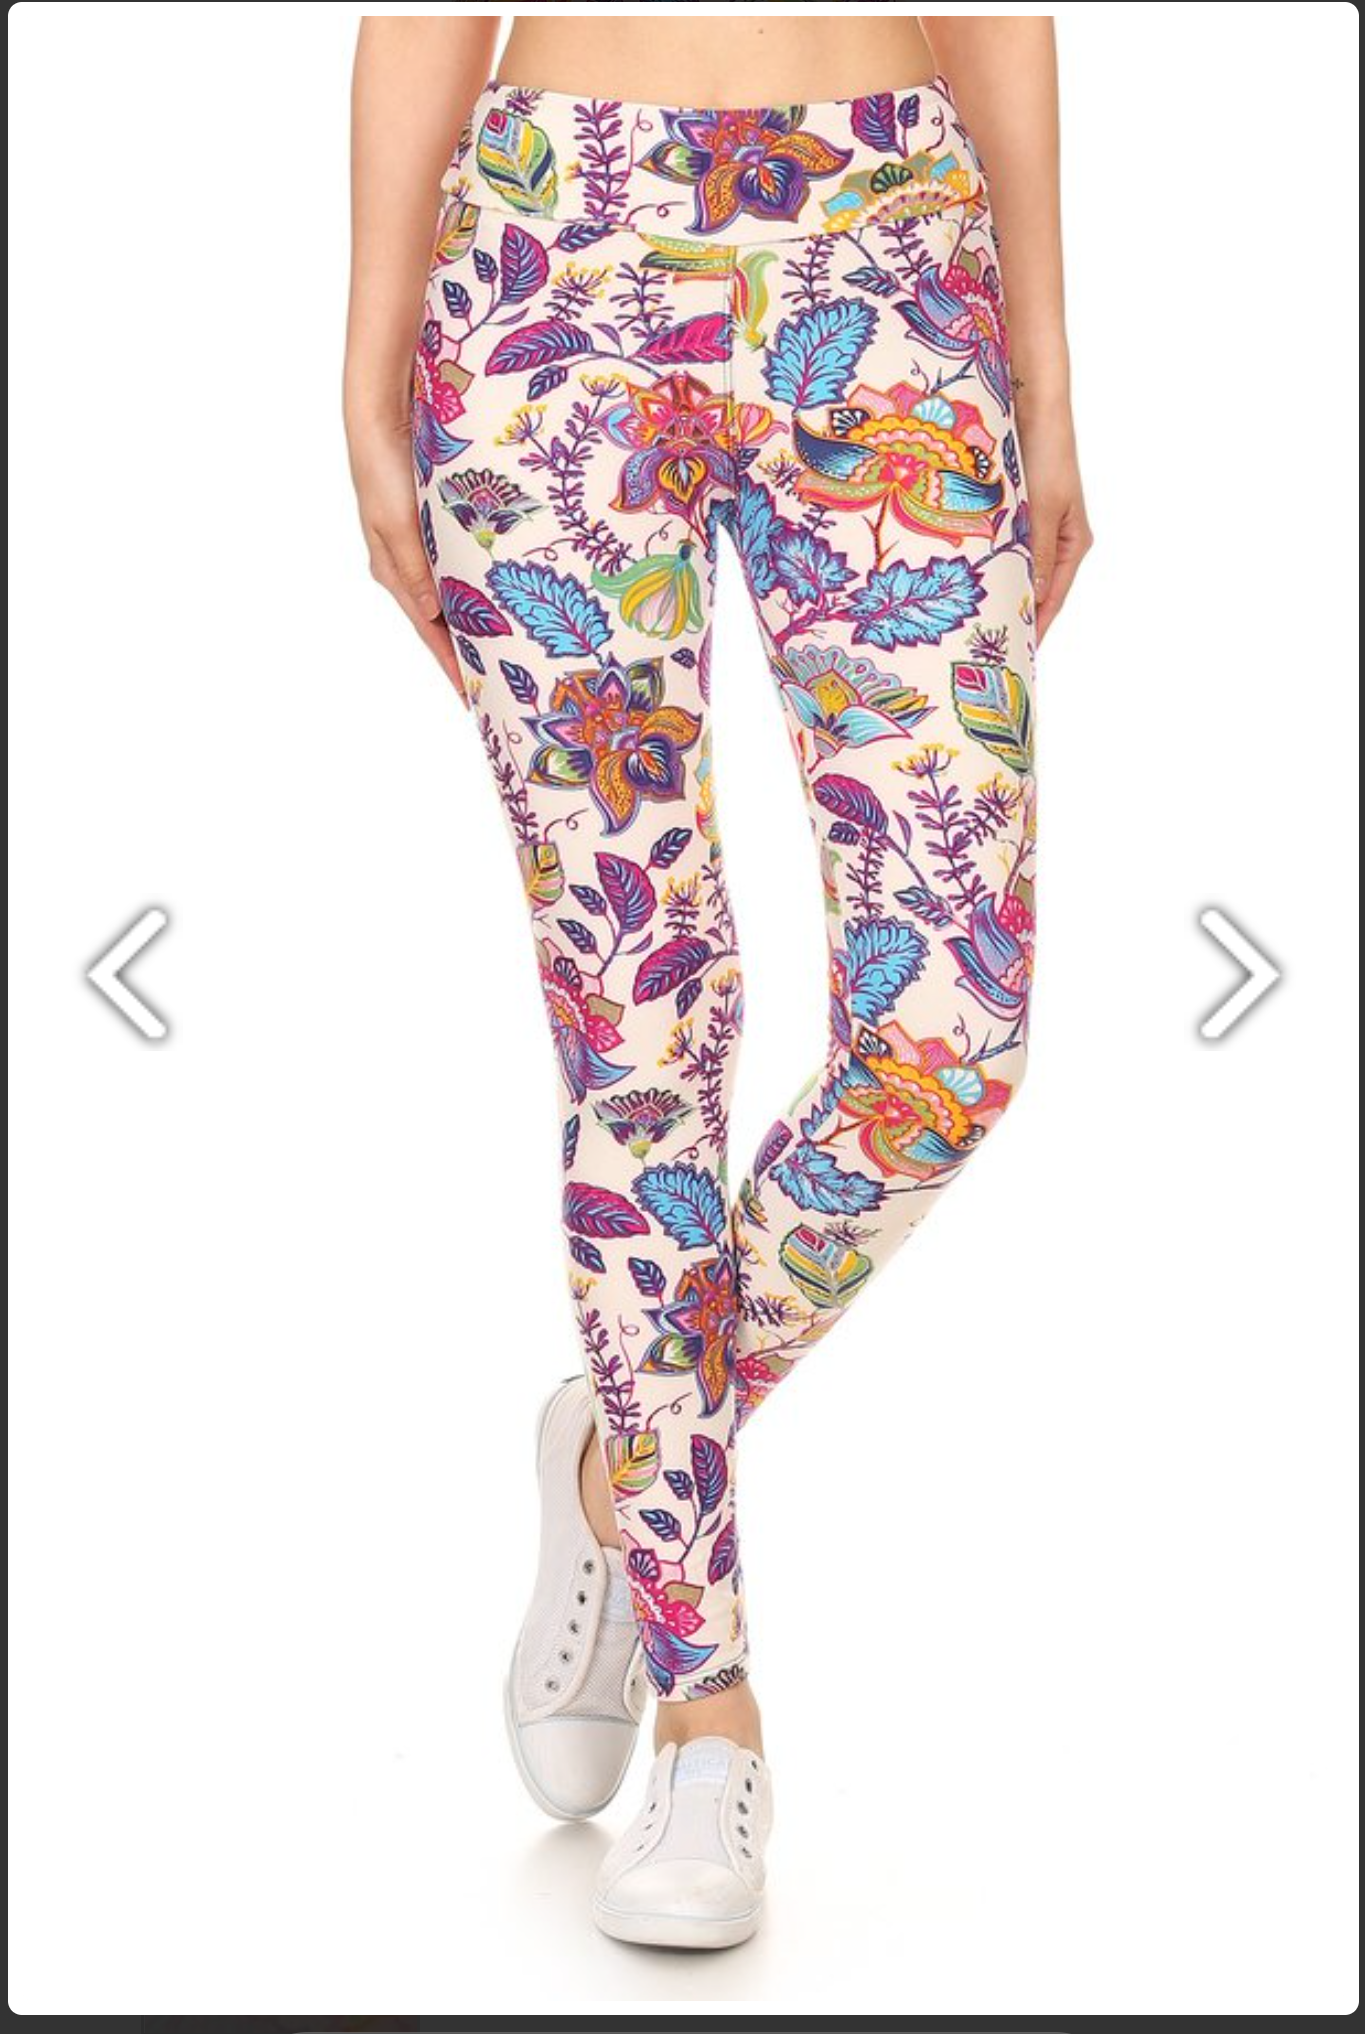 One Size Bright Floral Print Leggings on White Background